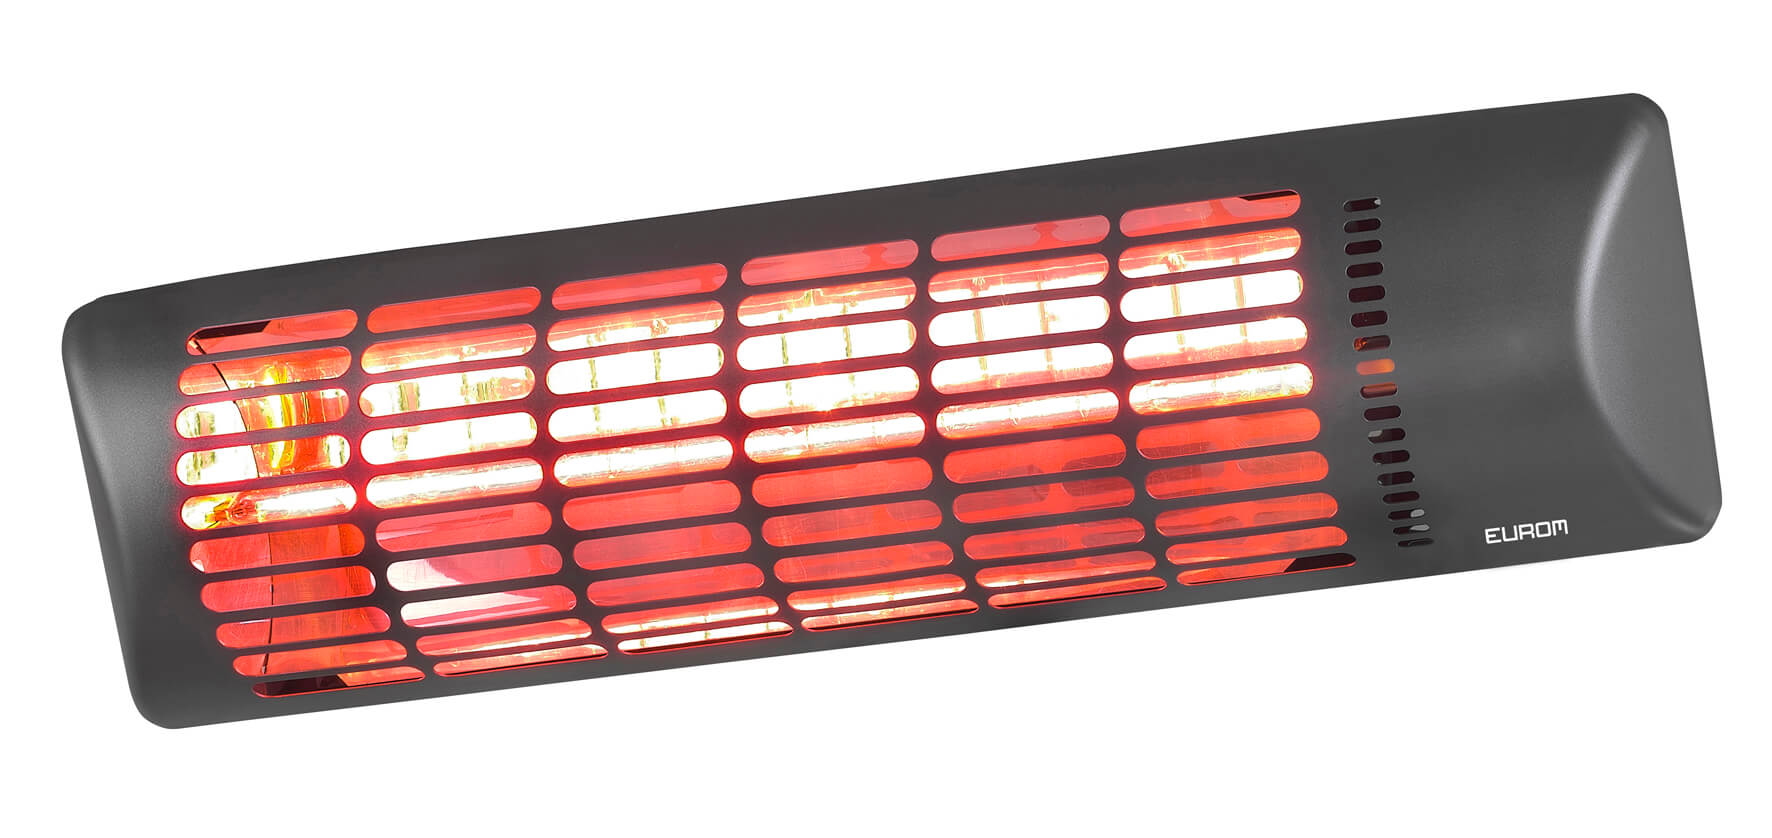 Eurom Golden Q-Time Golden 1800 is an elegant electric patio heater